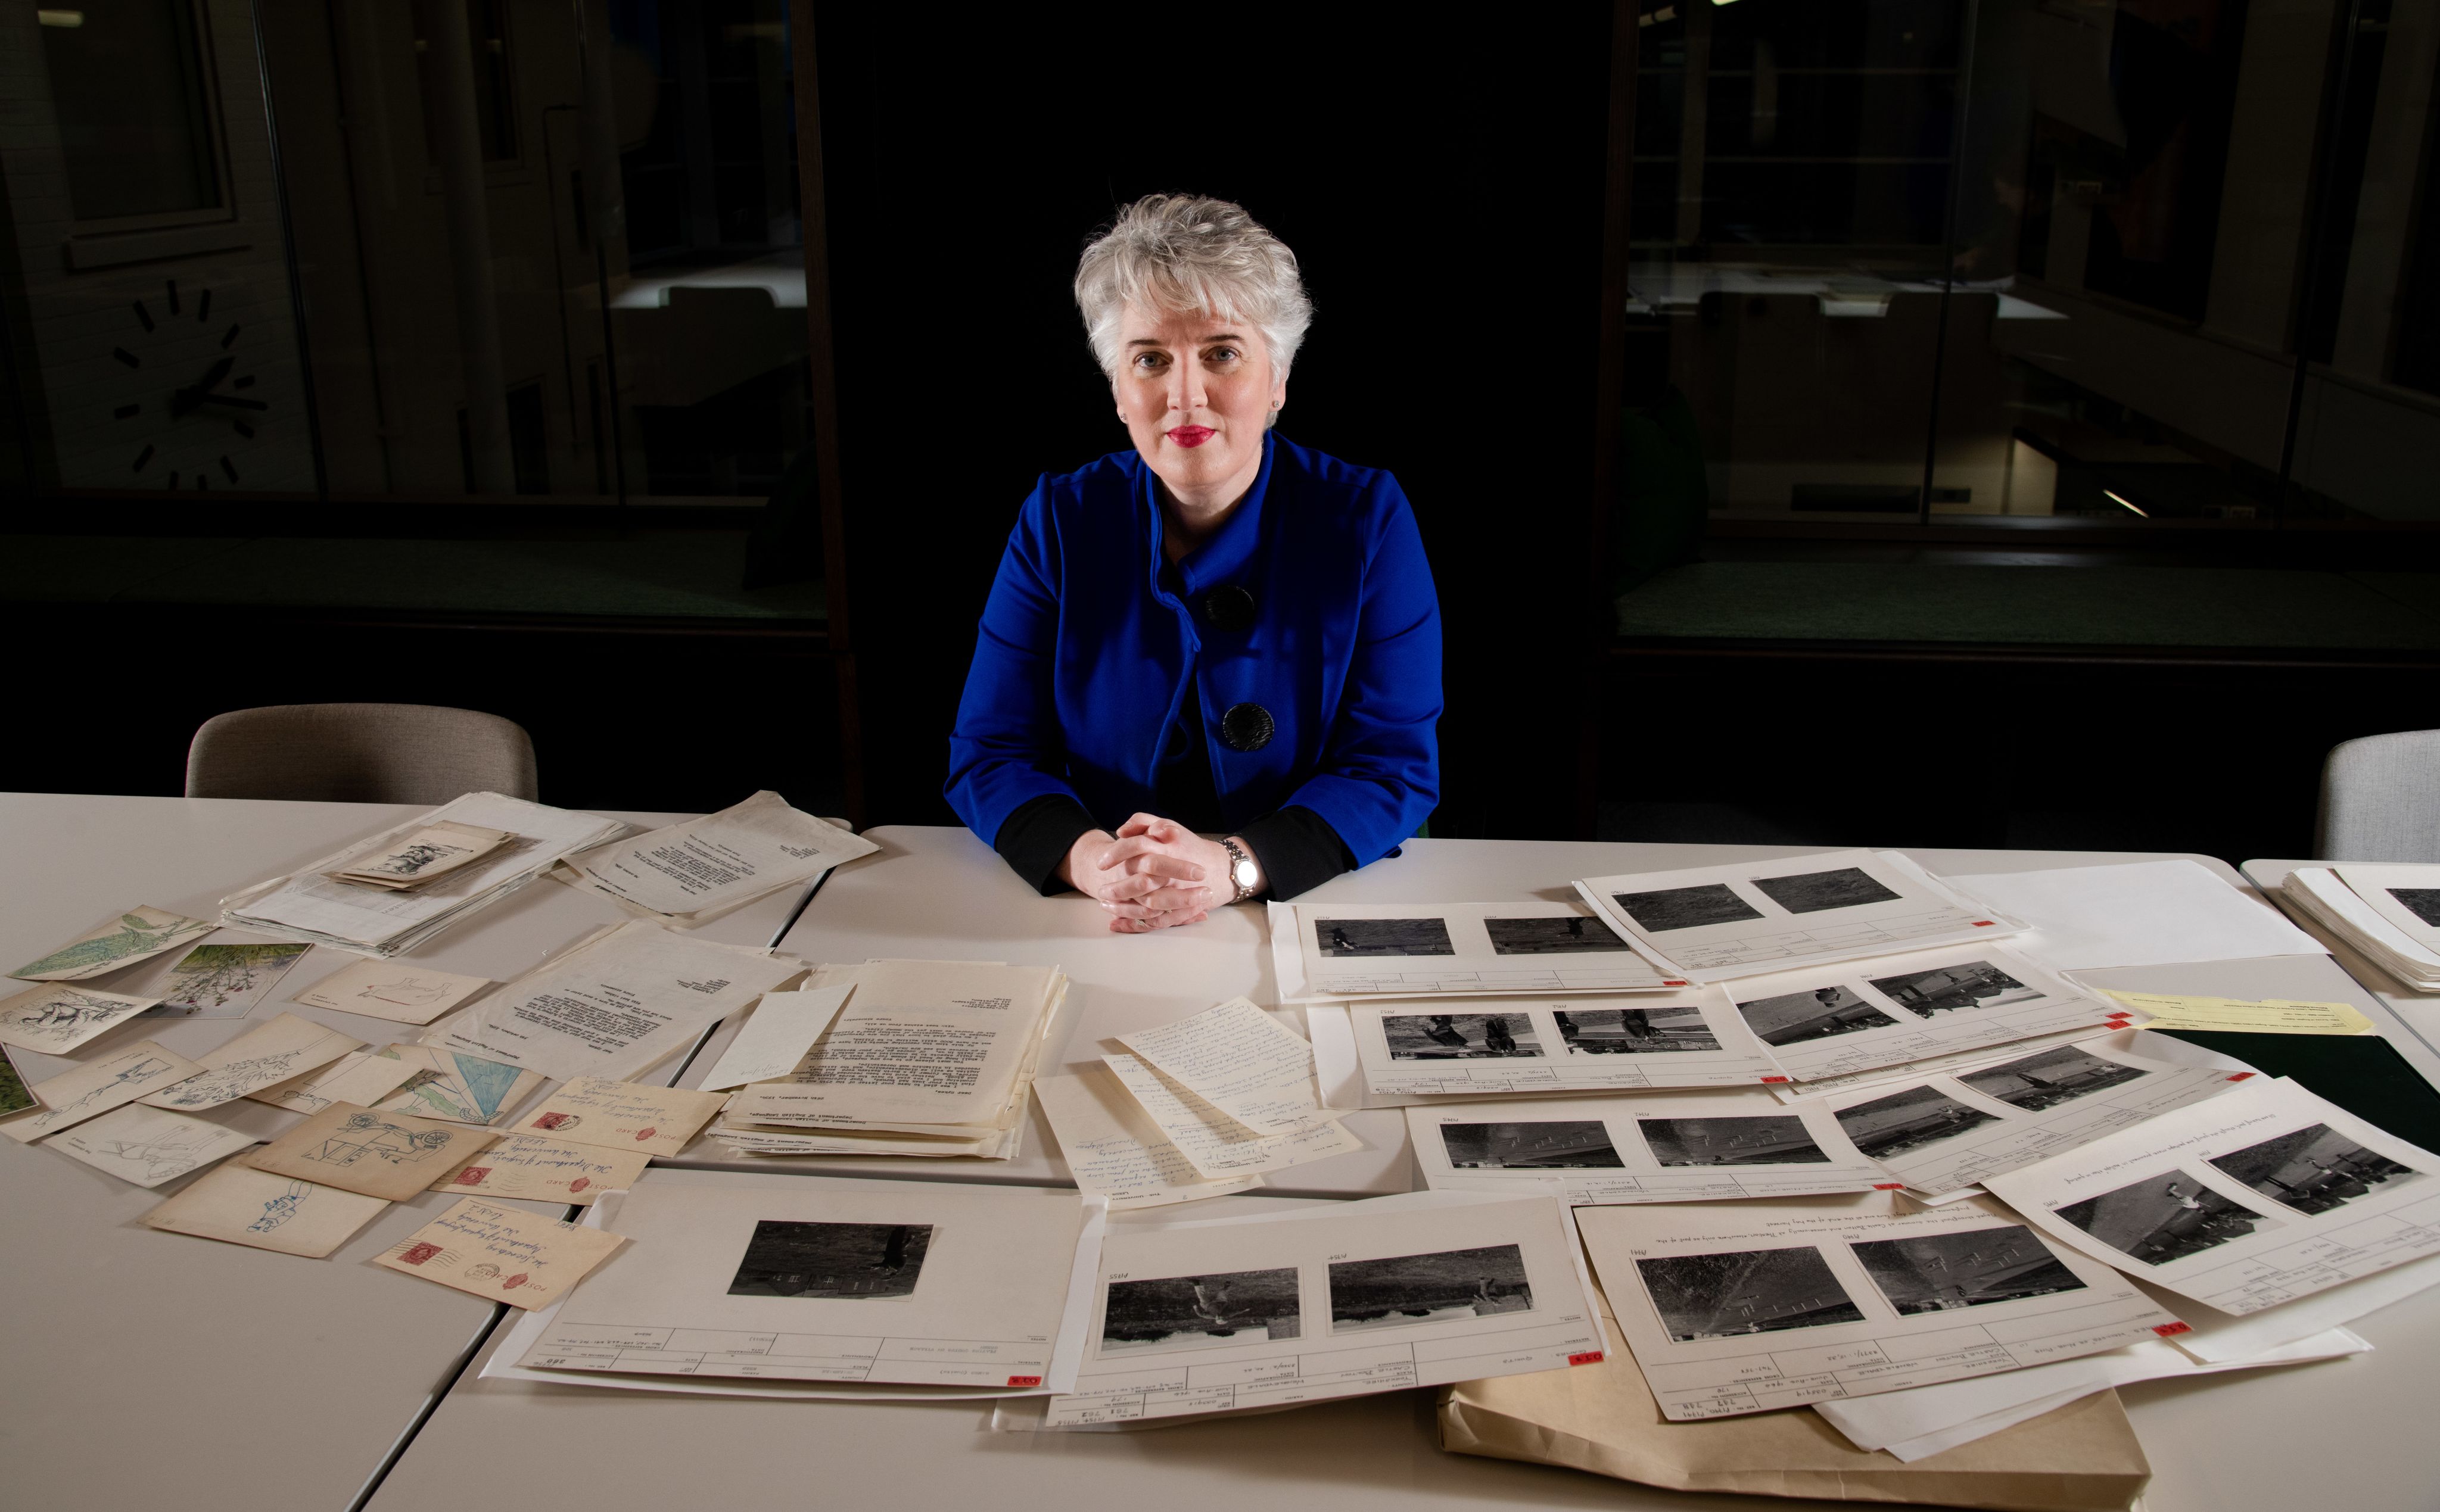 Woman surrounded by old papers and photographs.